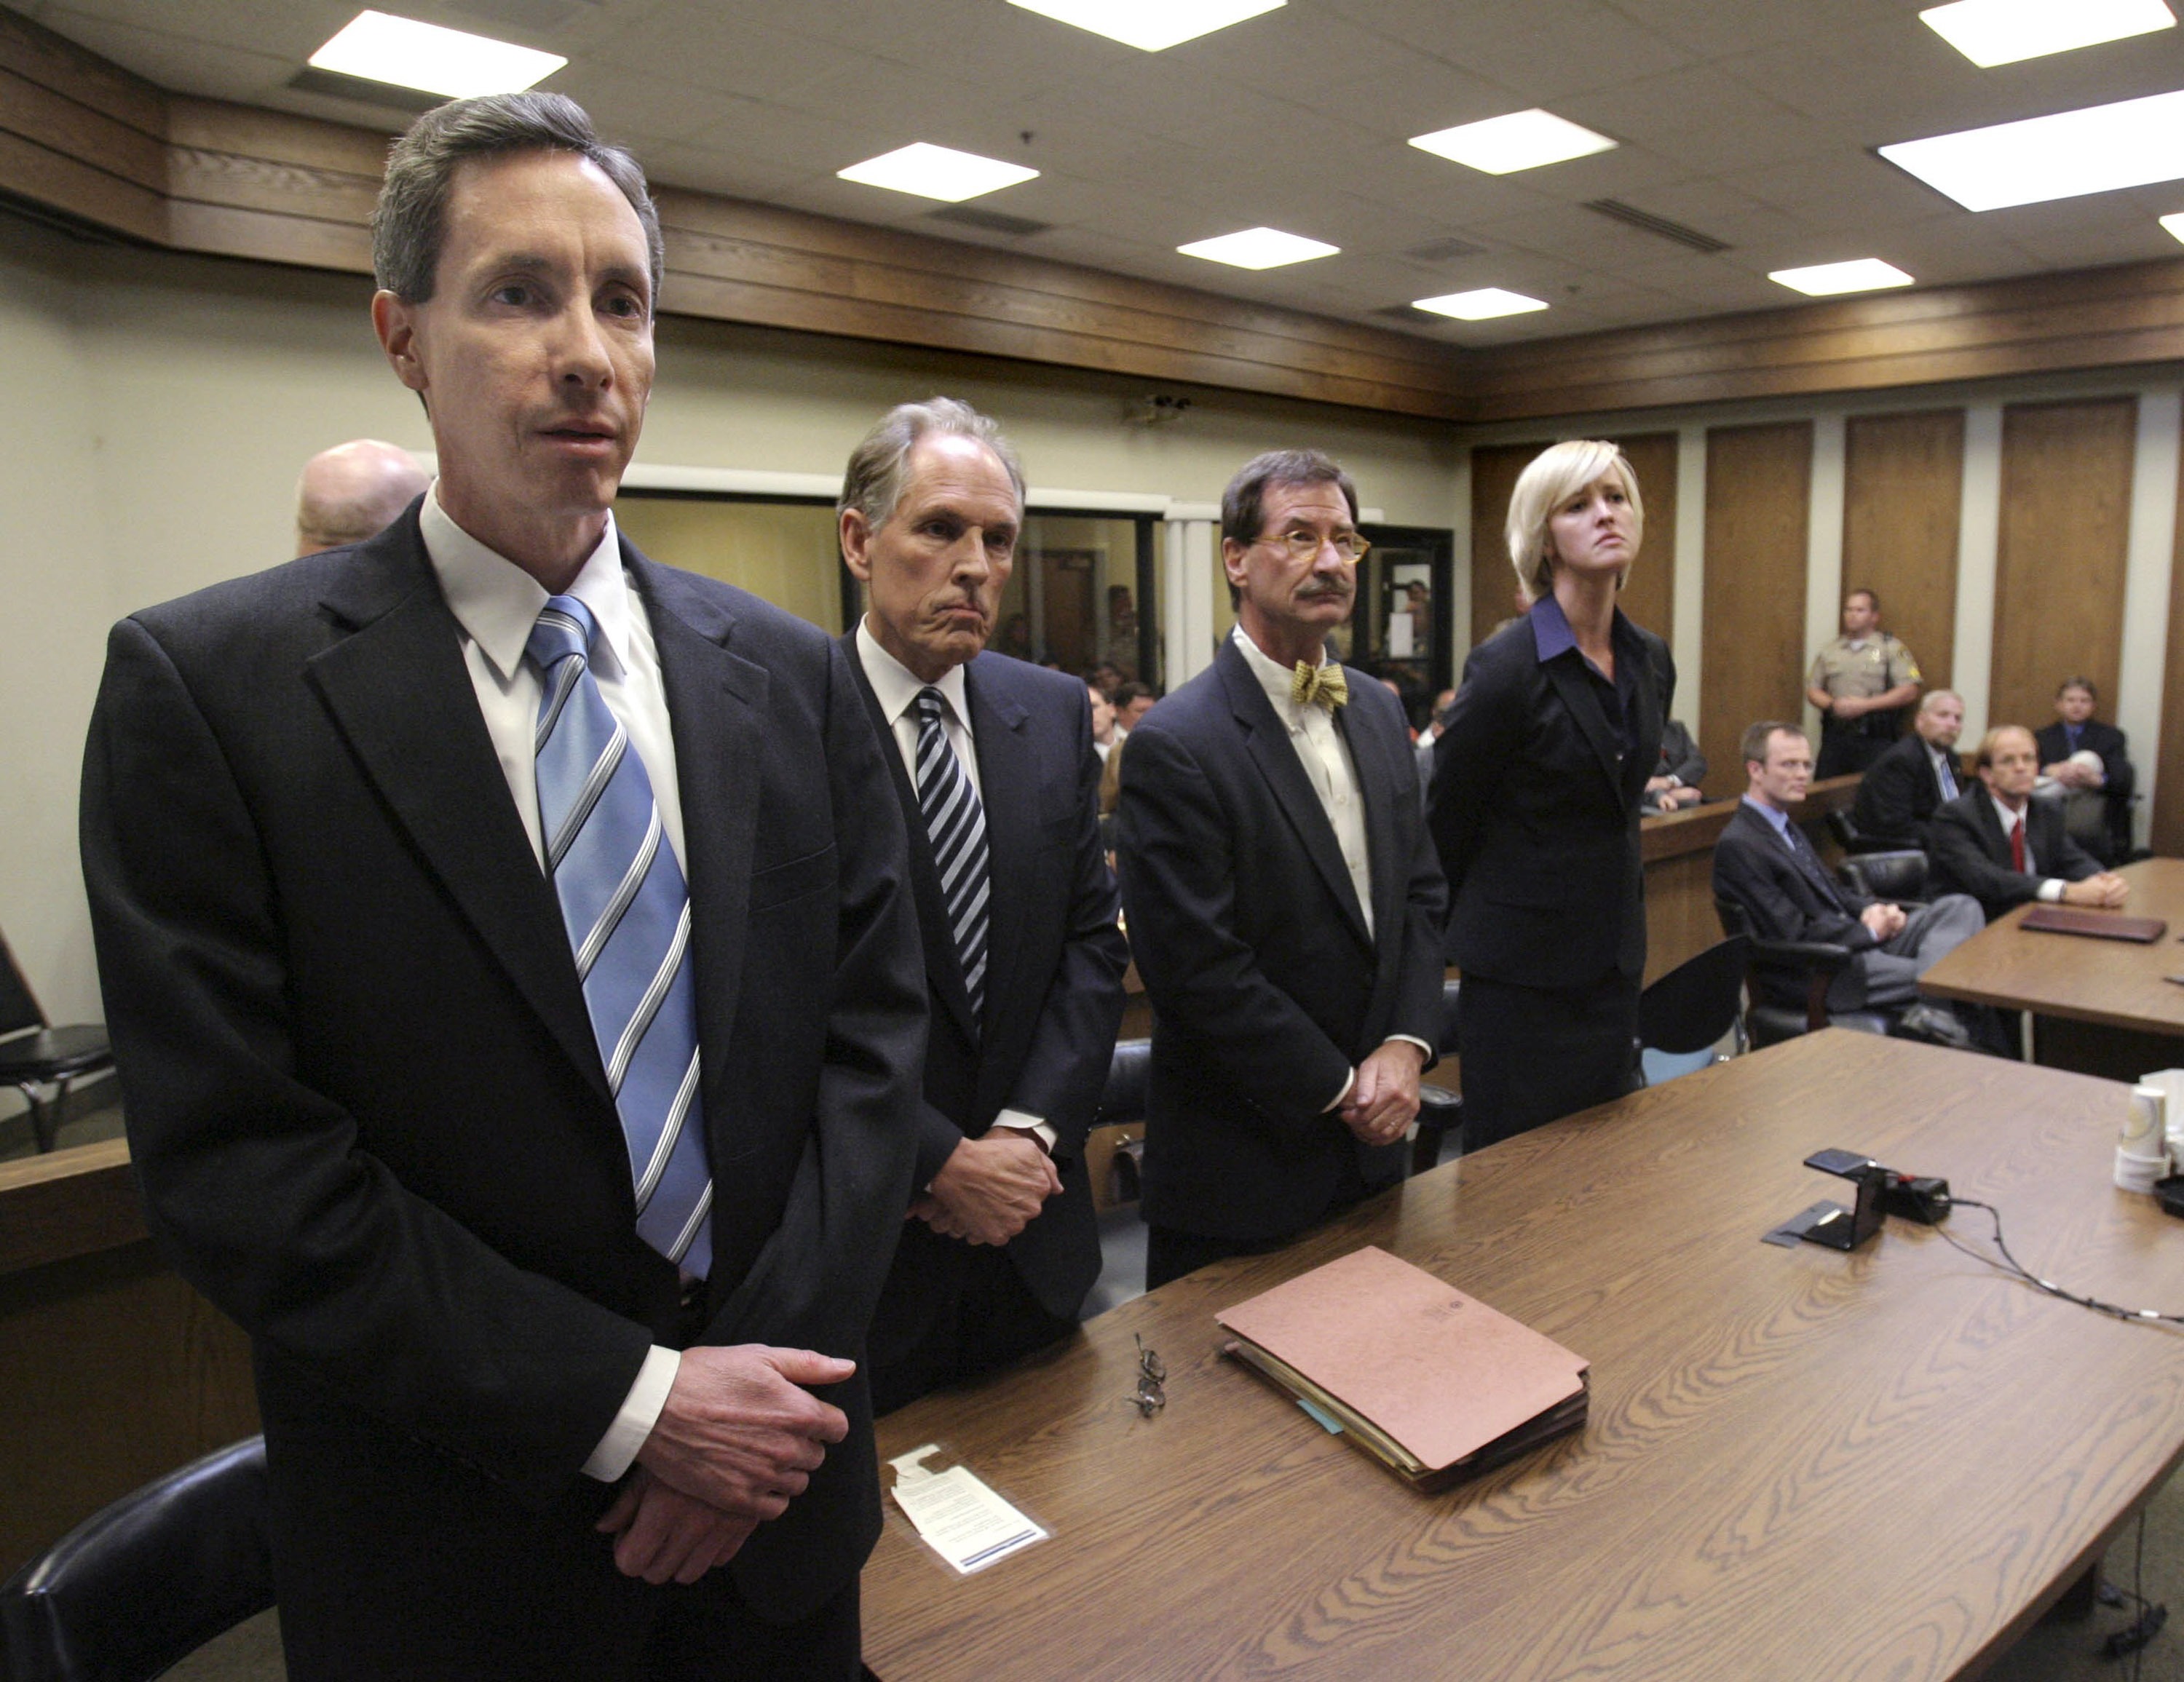 ST. GEORGE, UT - SEPTEMBER 25: Warren Jeffs (L) and his council reacts to the the guilty verdicts rendered in his trial September 25, 2007 in St. George, Utah. Jeffs, an accused polygamist and head of the breakaway Mormon sect, the Fundamentalist Church of Jesus Christ of Latter Day Saints, was found guilty on the two counts of being an accomplice to rape, related to the alleged coercion in the marriage and rape of a 14-year-old and a 19-year-old in 2001. The jury is still in deliberations after a juror was excused and replaced by an alternate. (Photo by Douglas C. Pizac-Pool/Getty Images)